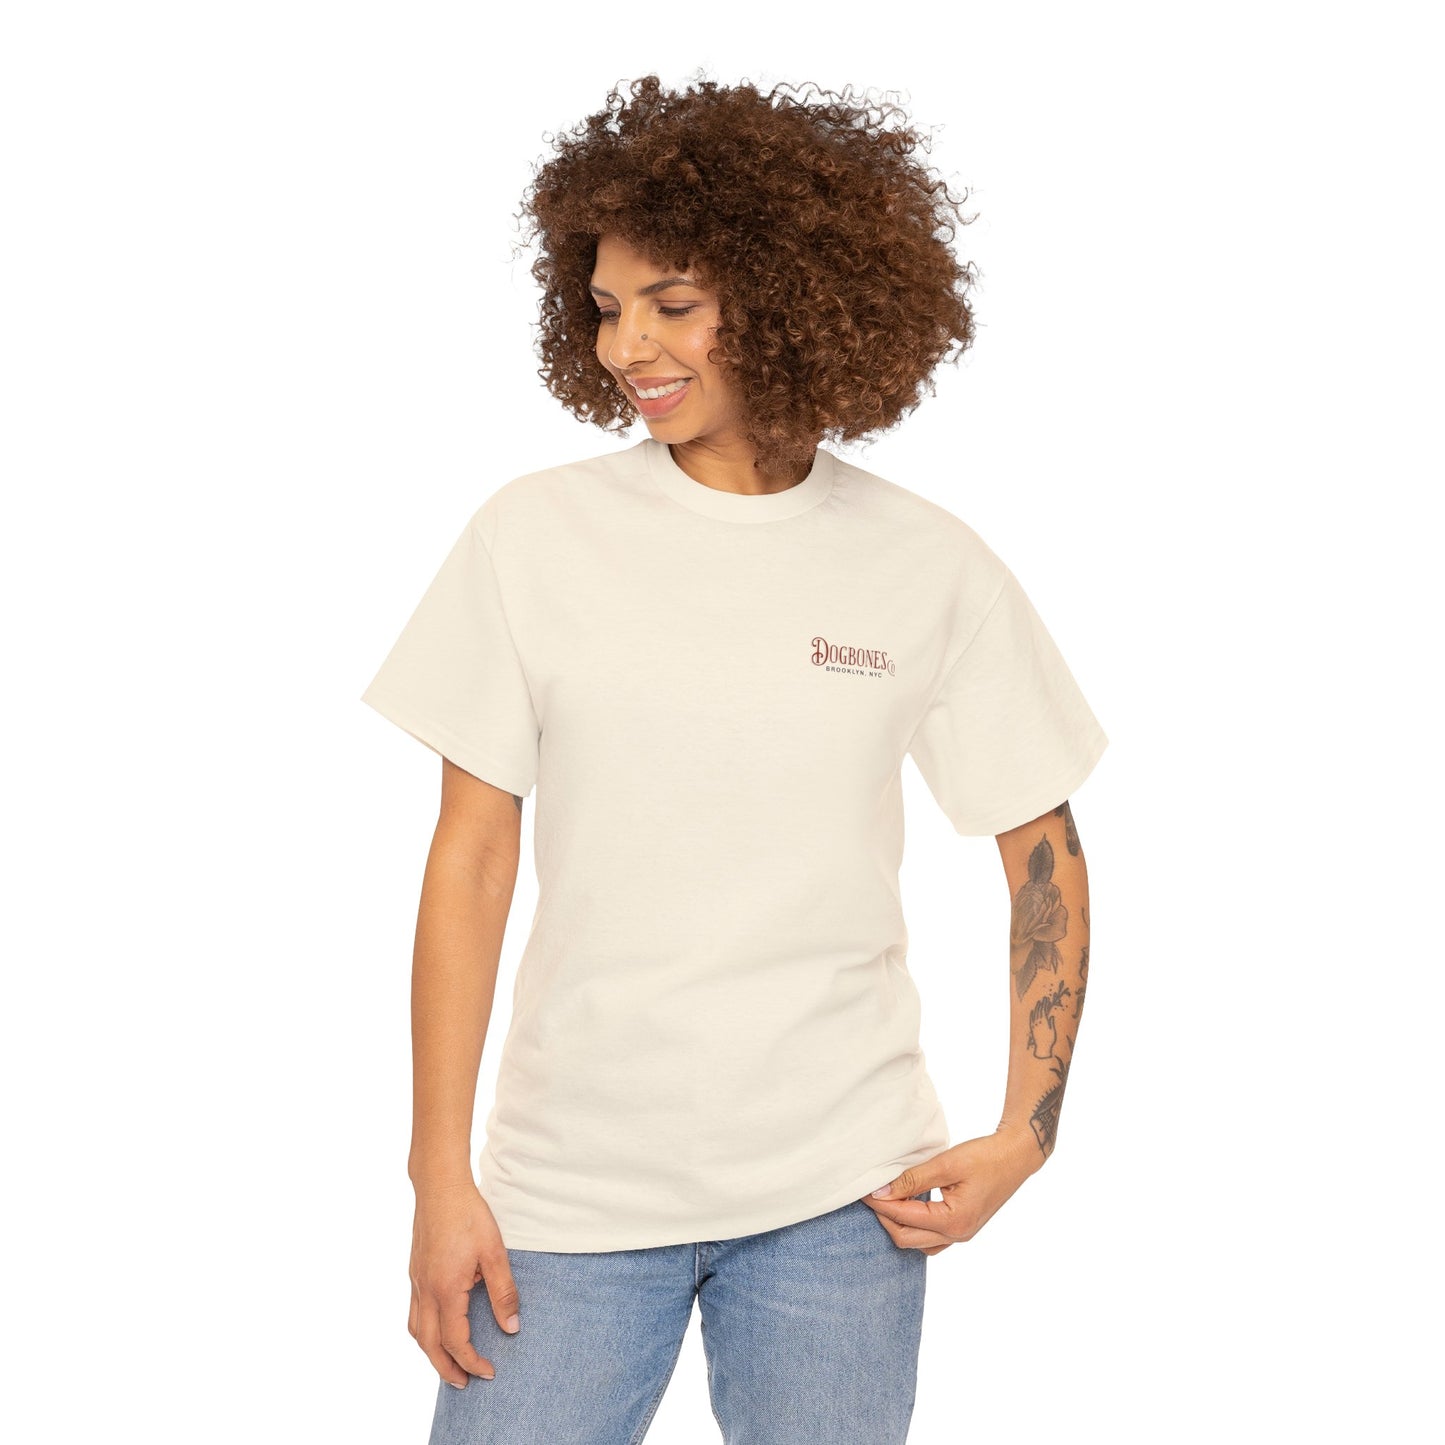 DOGBONES Logo with Turnbull Quote Unisex Heavy Cotton Tee